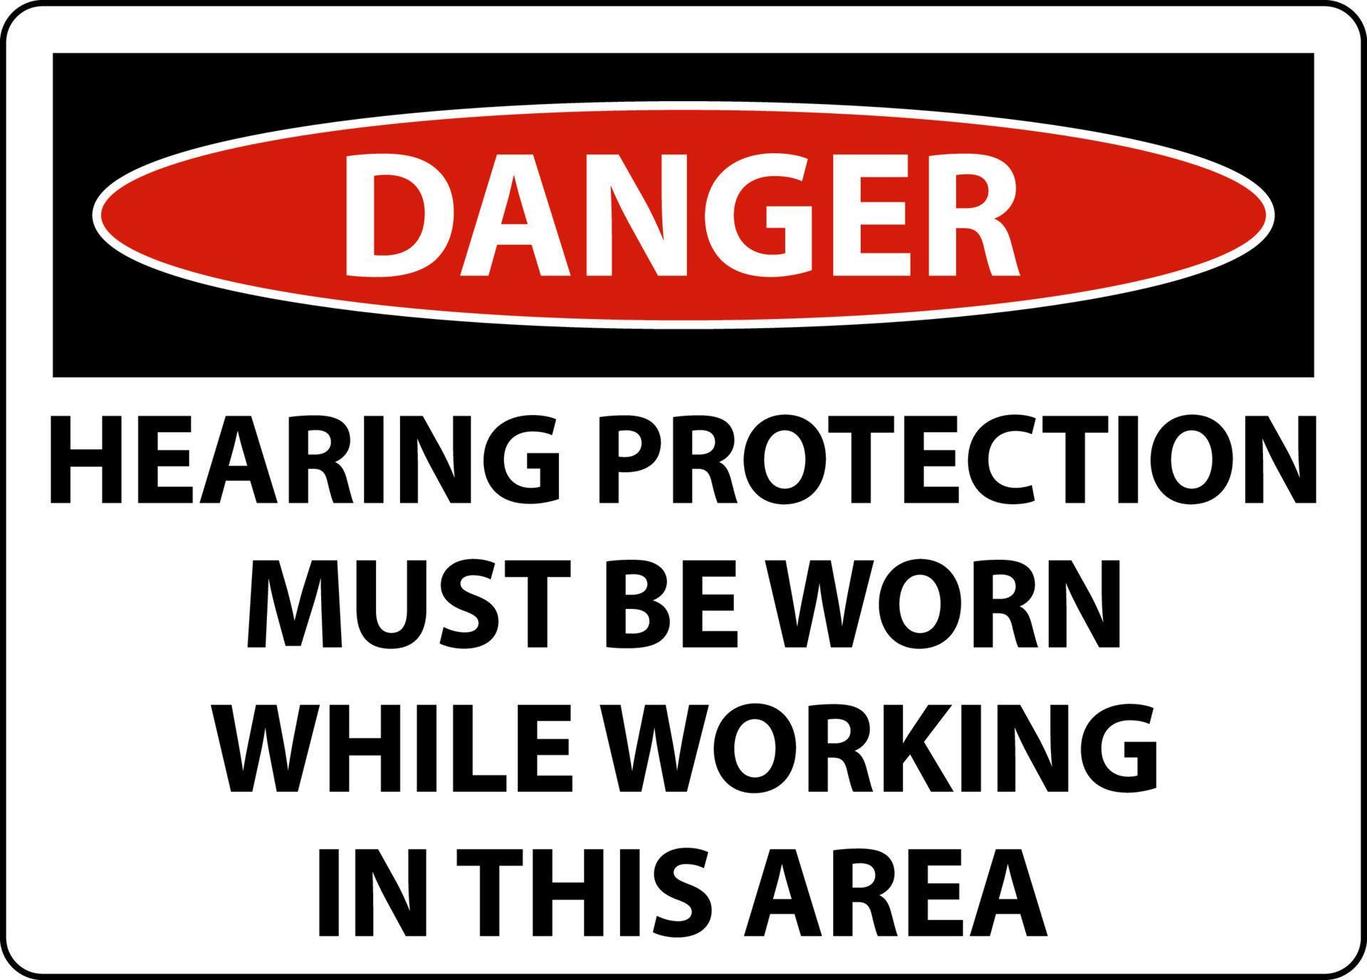 Danger Hearing Protection Must Be Worn Sign On White Background vector